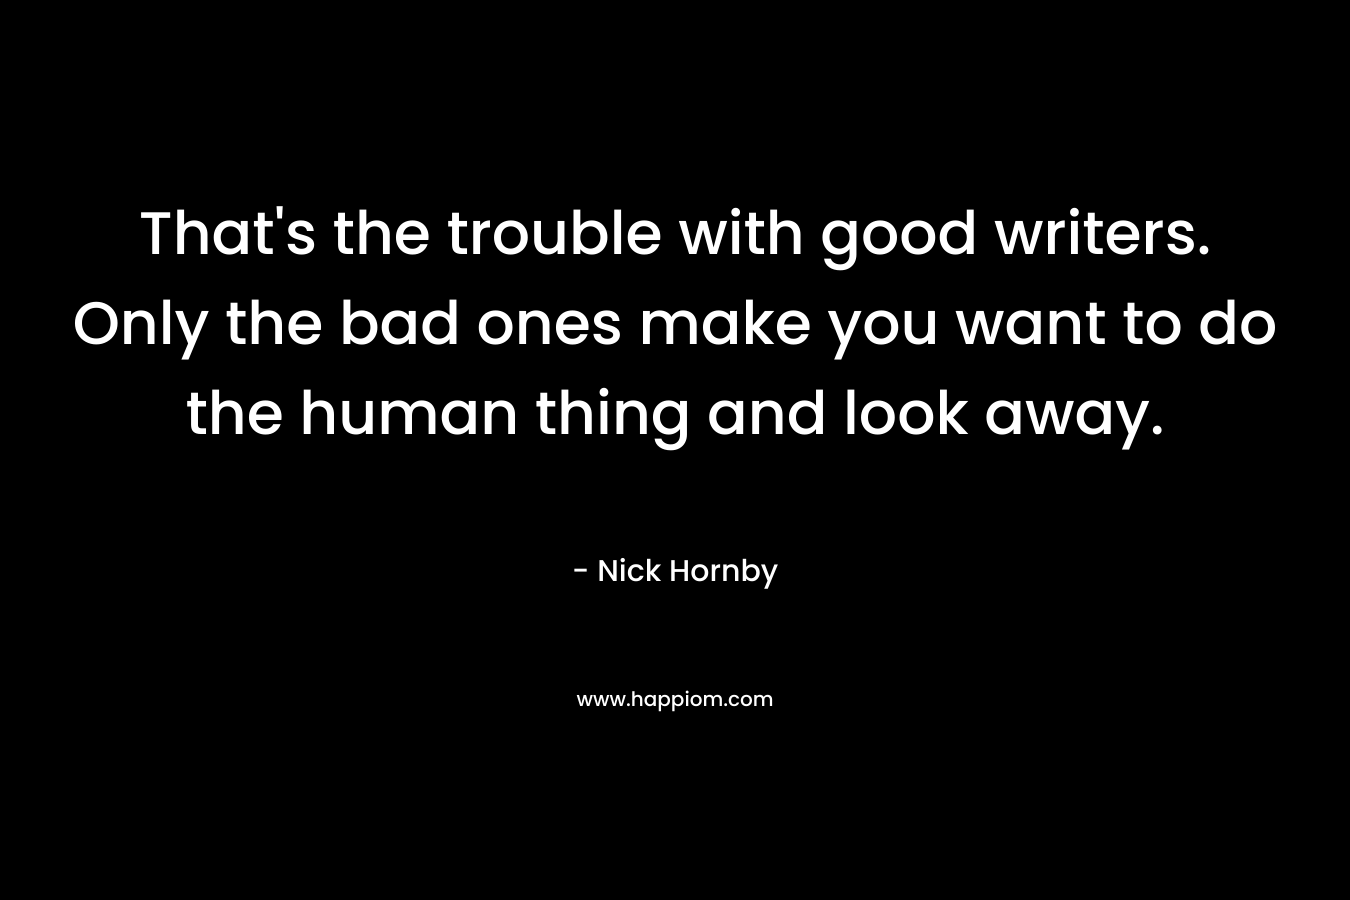 That’s the trouble with good writers. Only the bad ones make you want to do the human thing and look away. – Nick Hornby